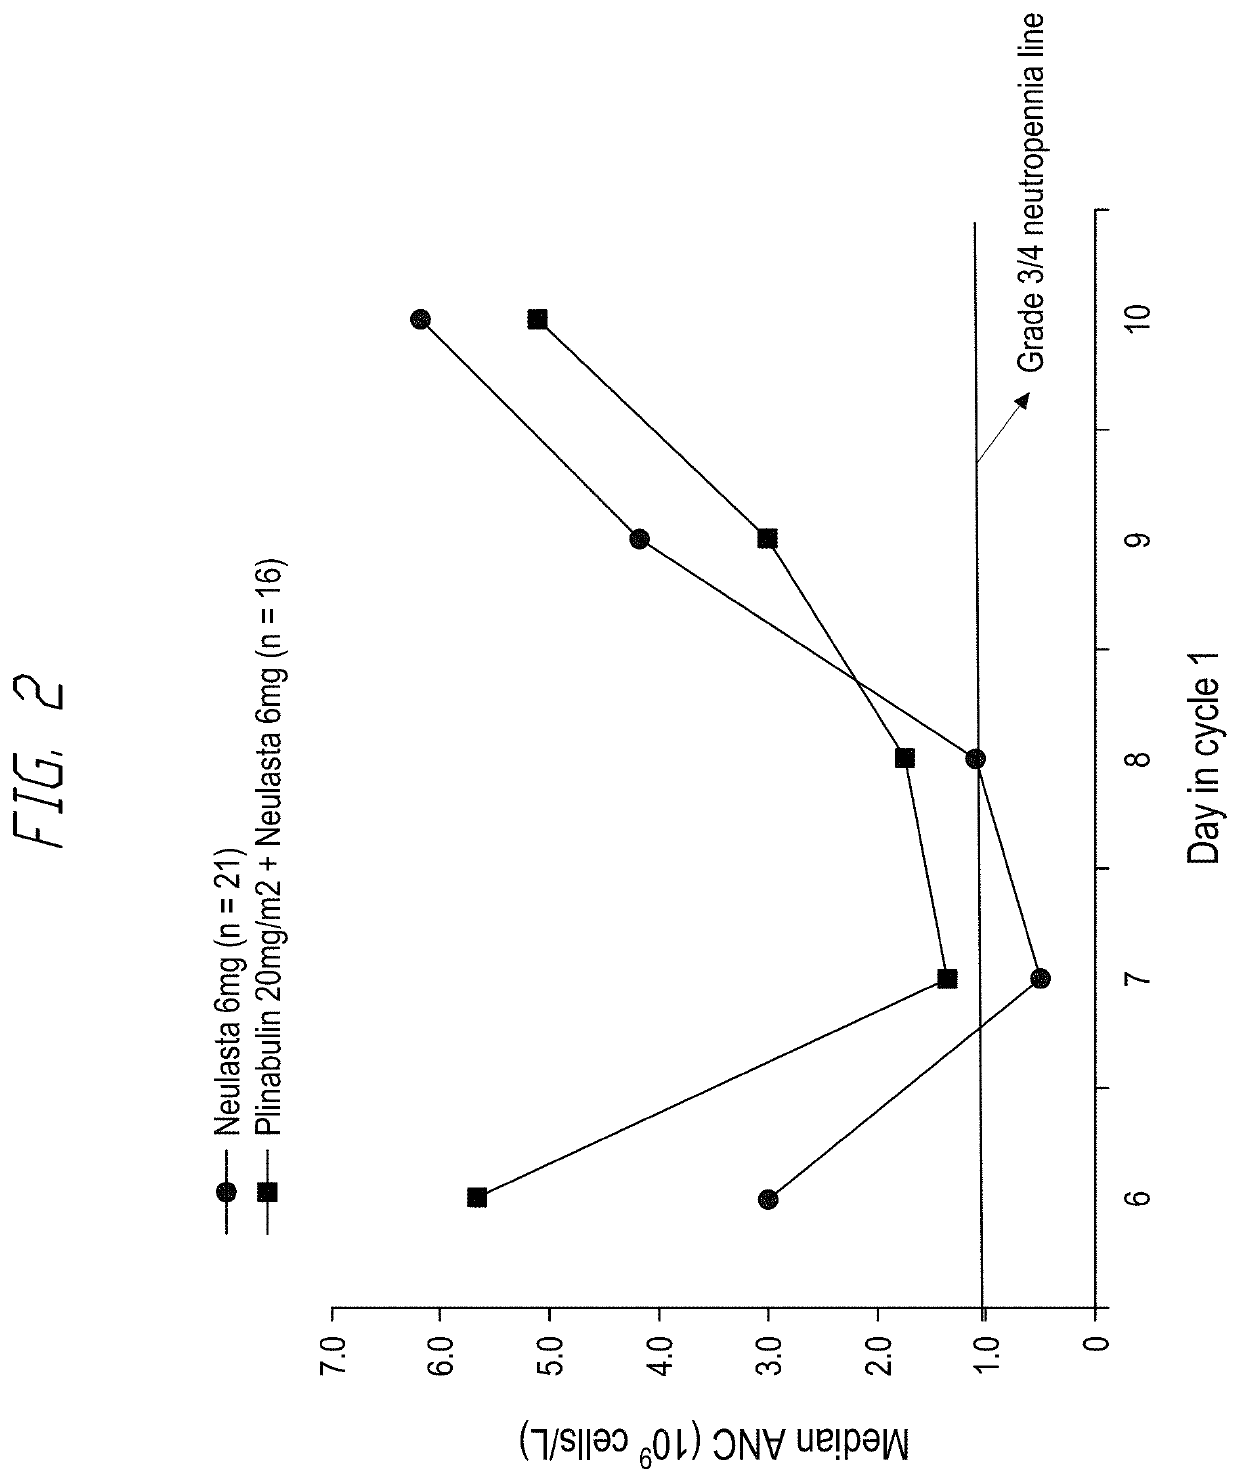 Composition and method for reducing chemotherapy-induced neutropenia via the administration of plinabulin and a g-csf agent